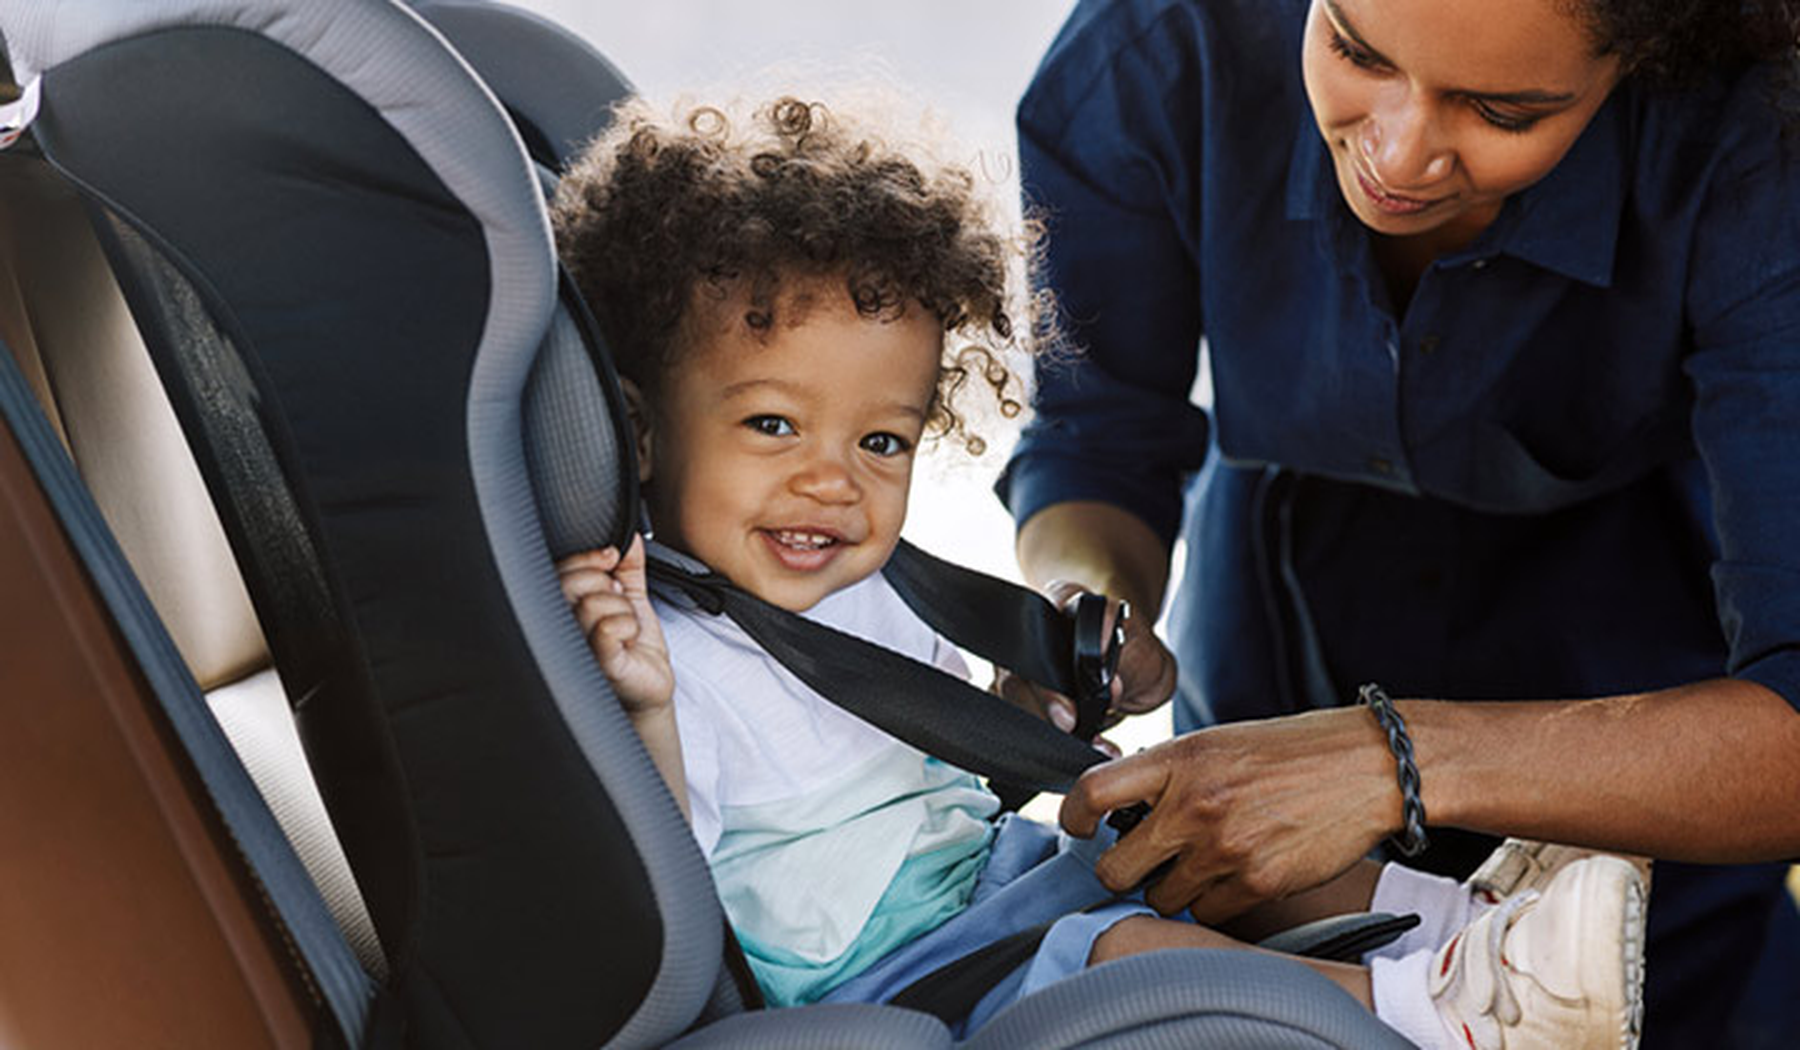 Toddler getting strapped into a car seat by his mom